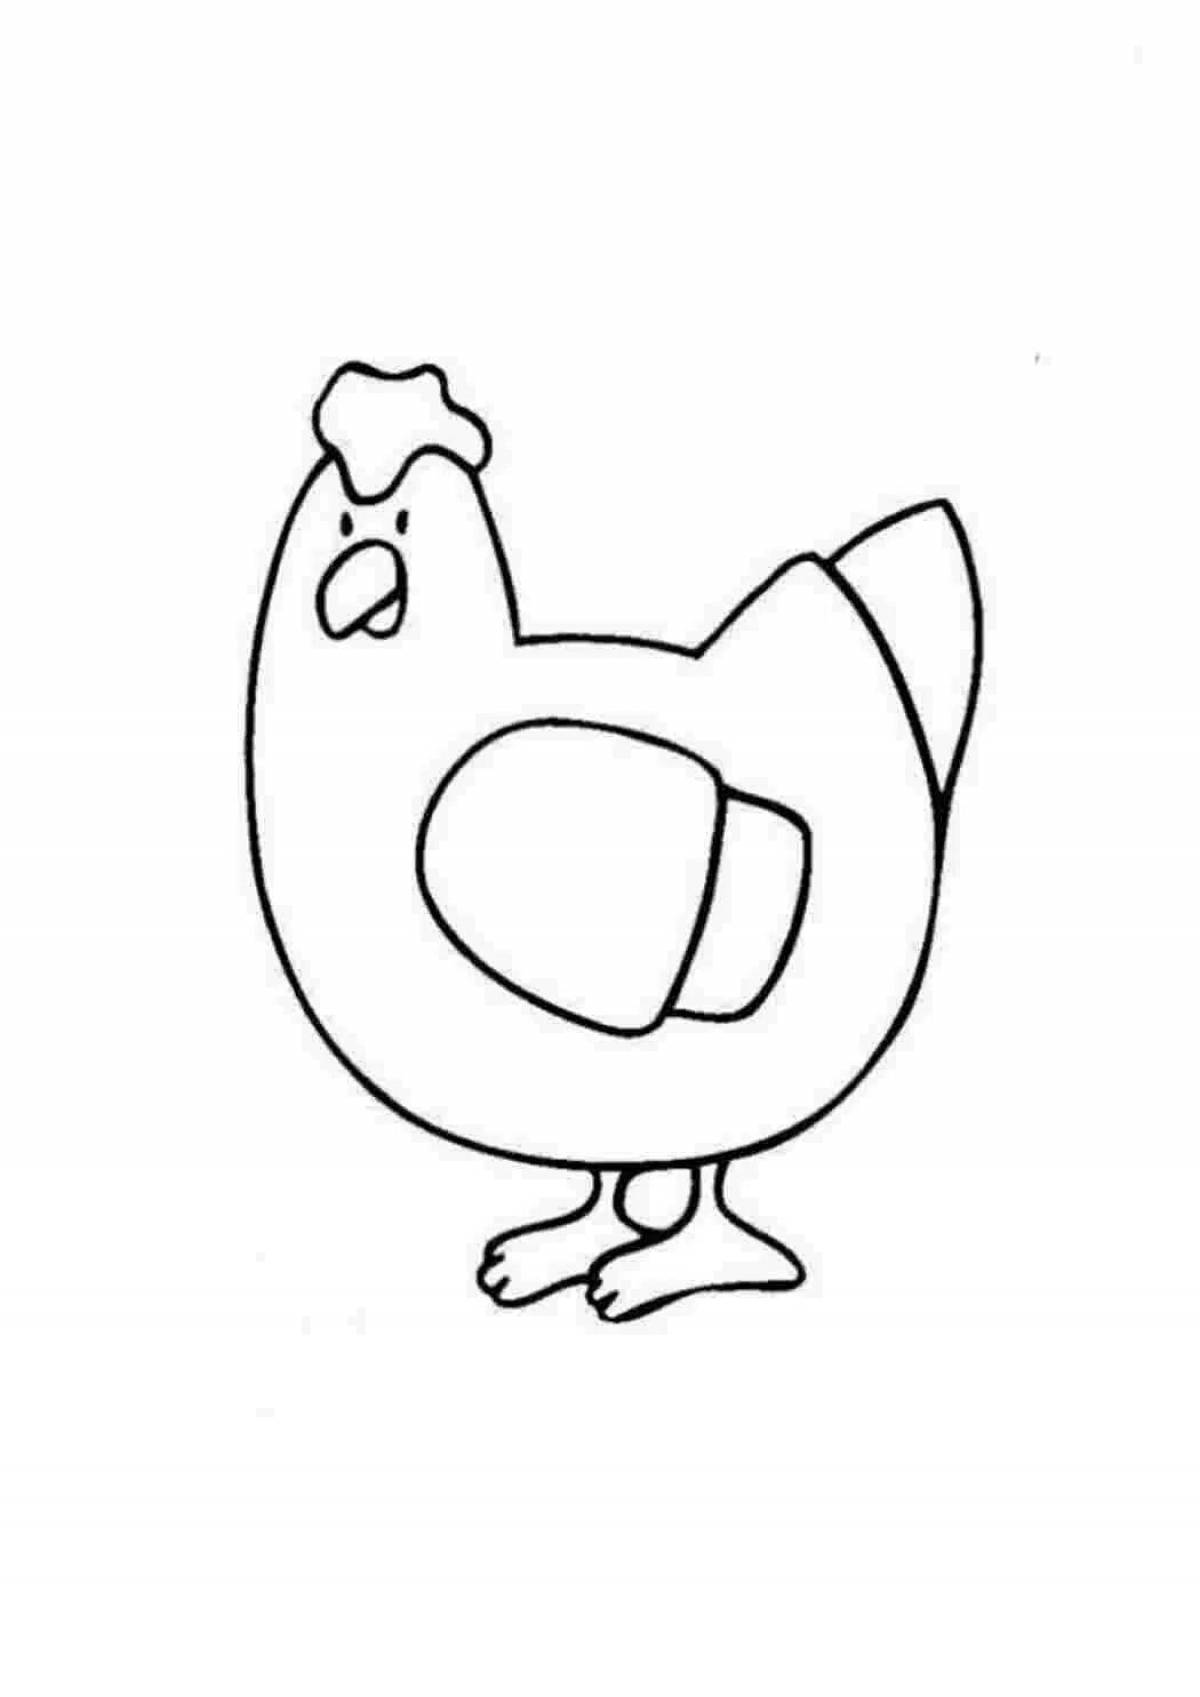 Lovely chicken drawing for kids